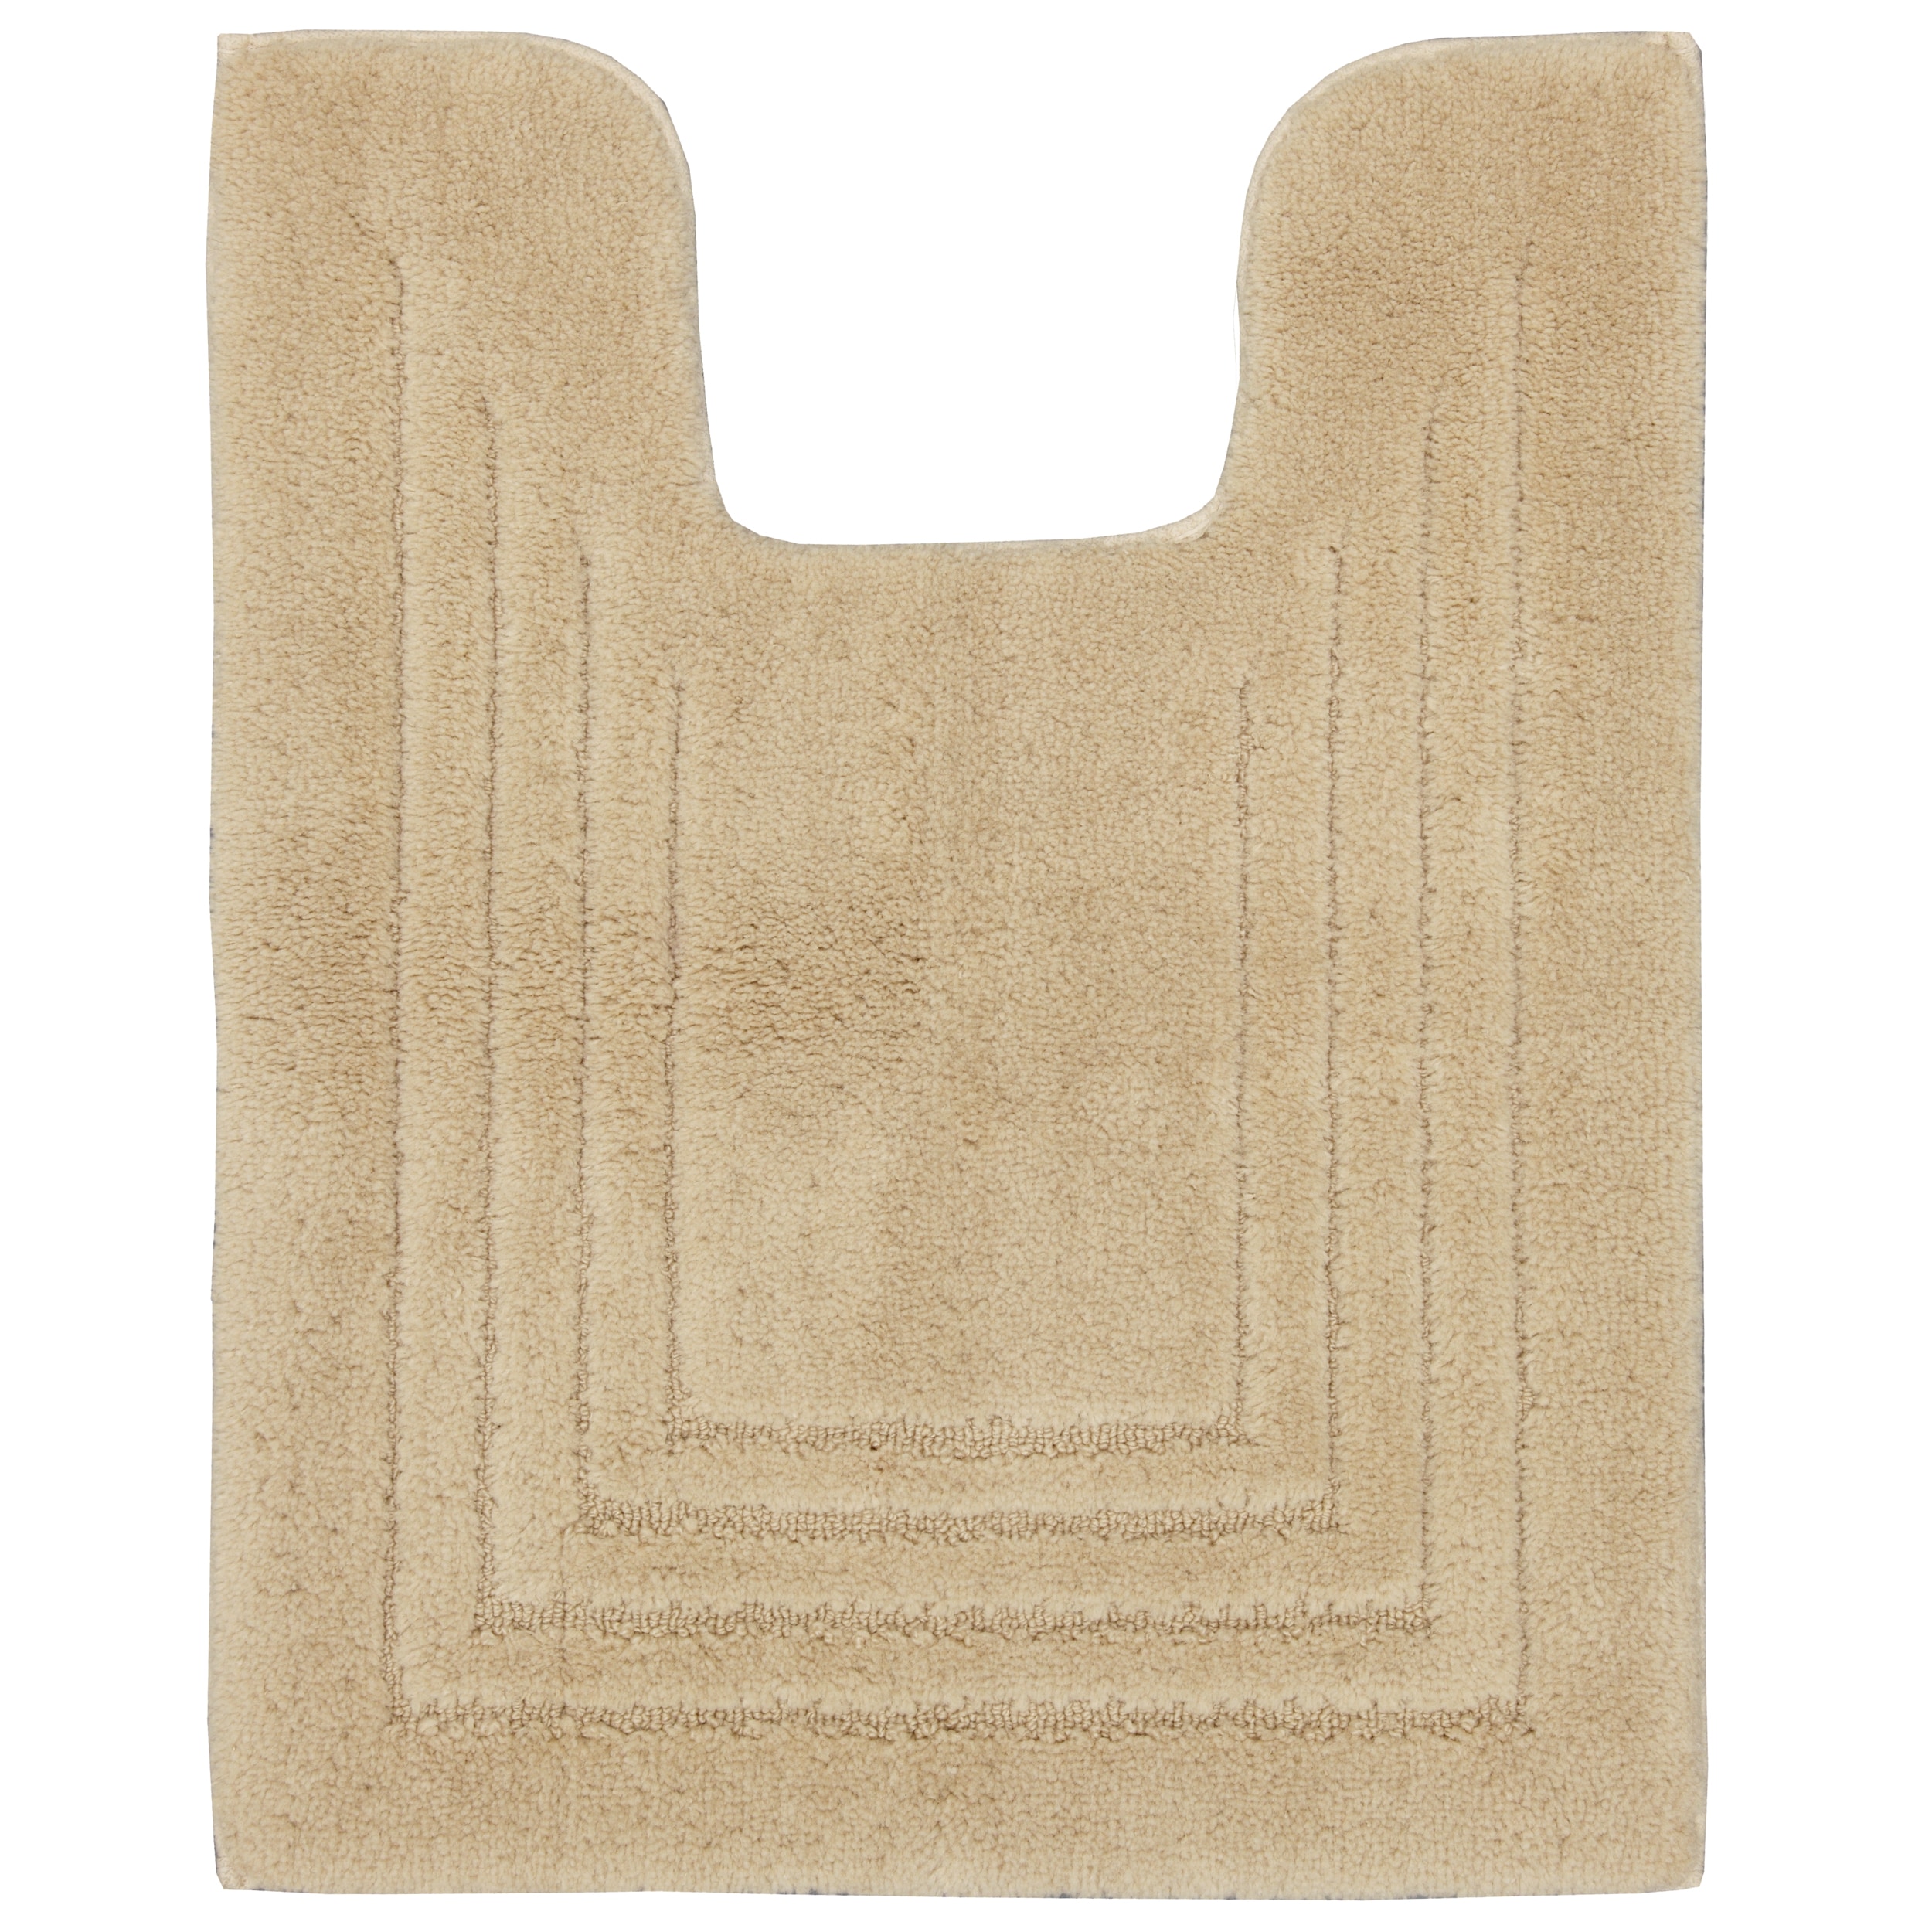 https://ak1.ostkcdn.com/images/products/Riviera-Contour-Non-skid-Bath-Rug--7738678-7cd9c389-84c2-4f67-b39c-f334da65eedc.jpg